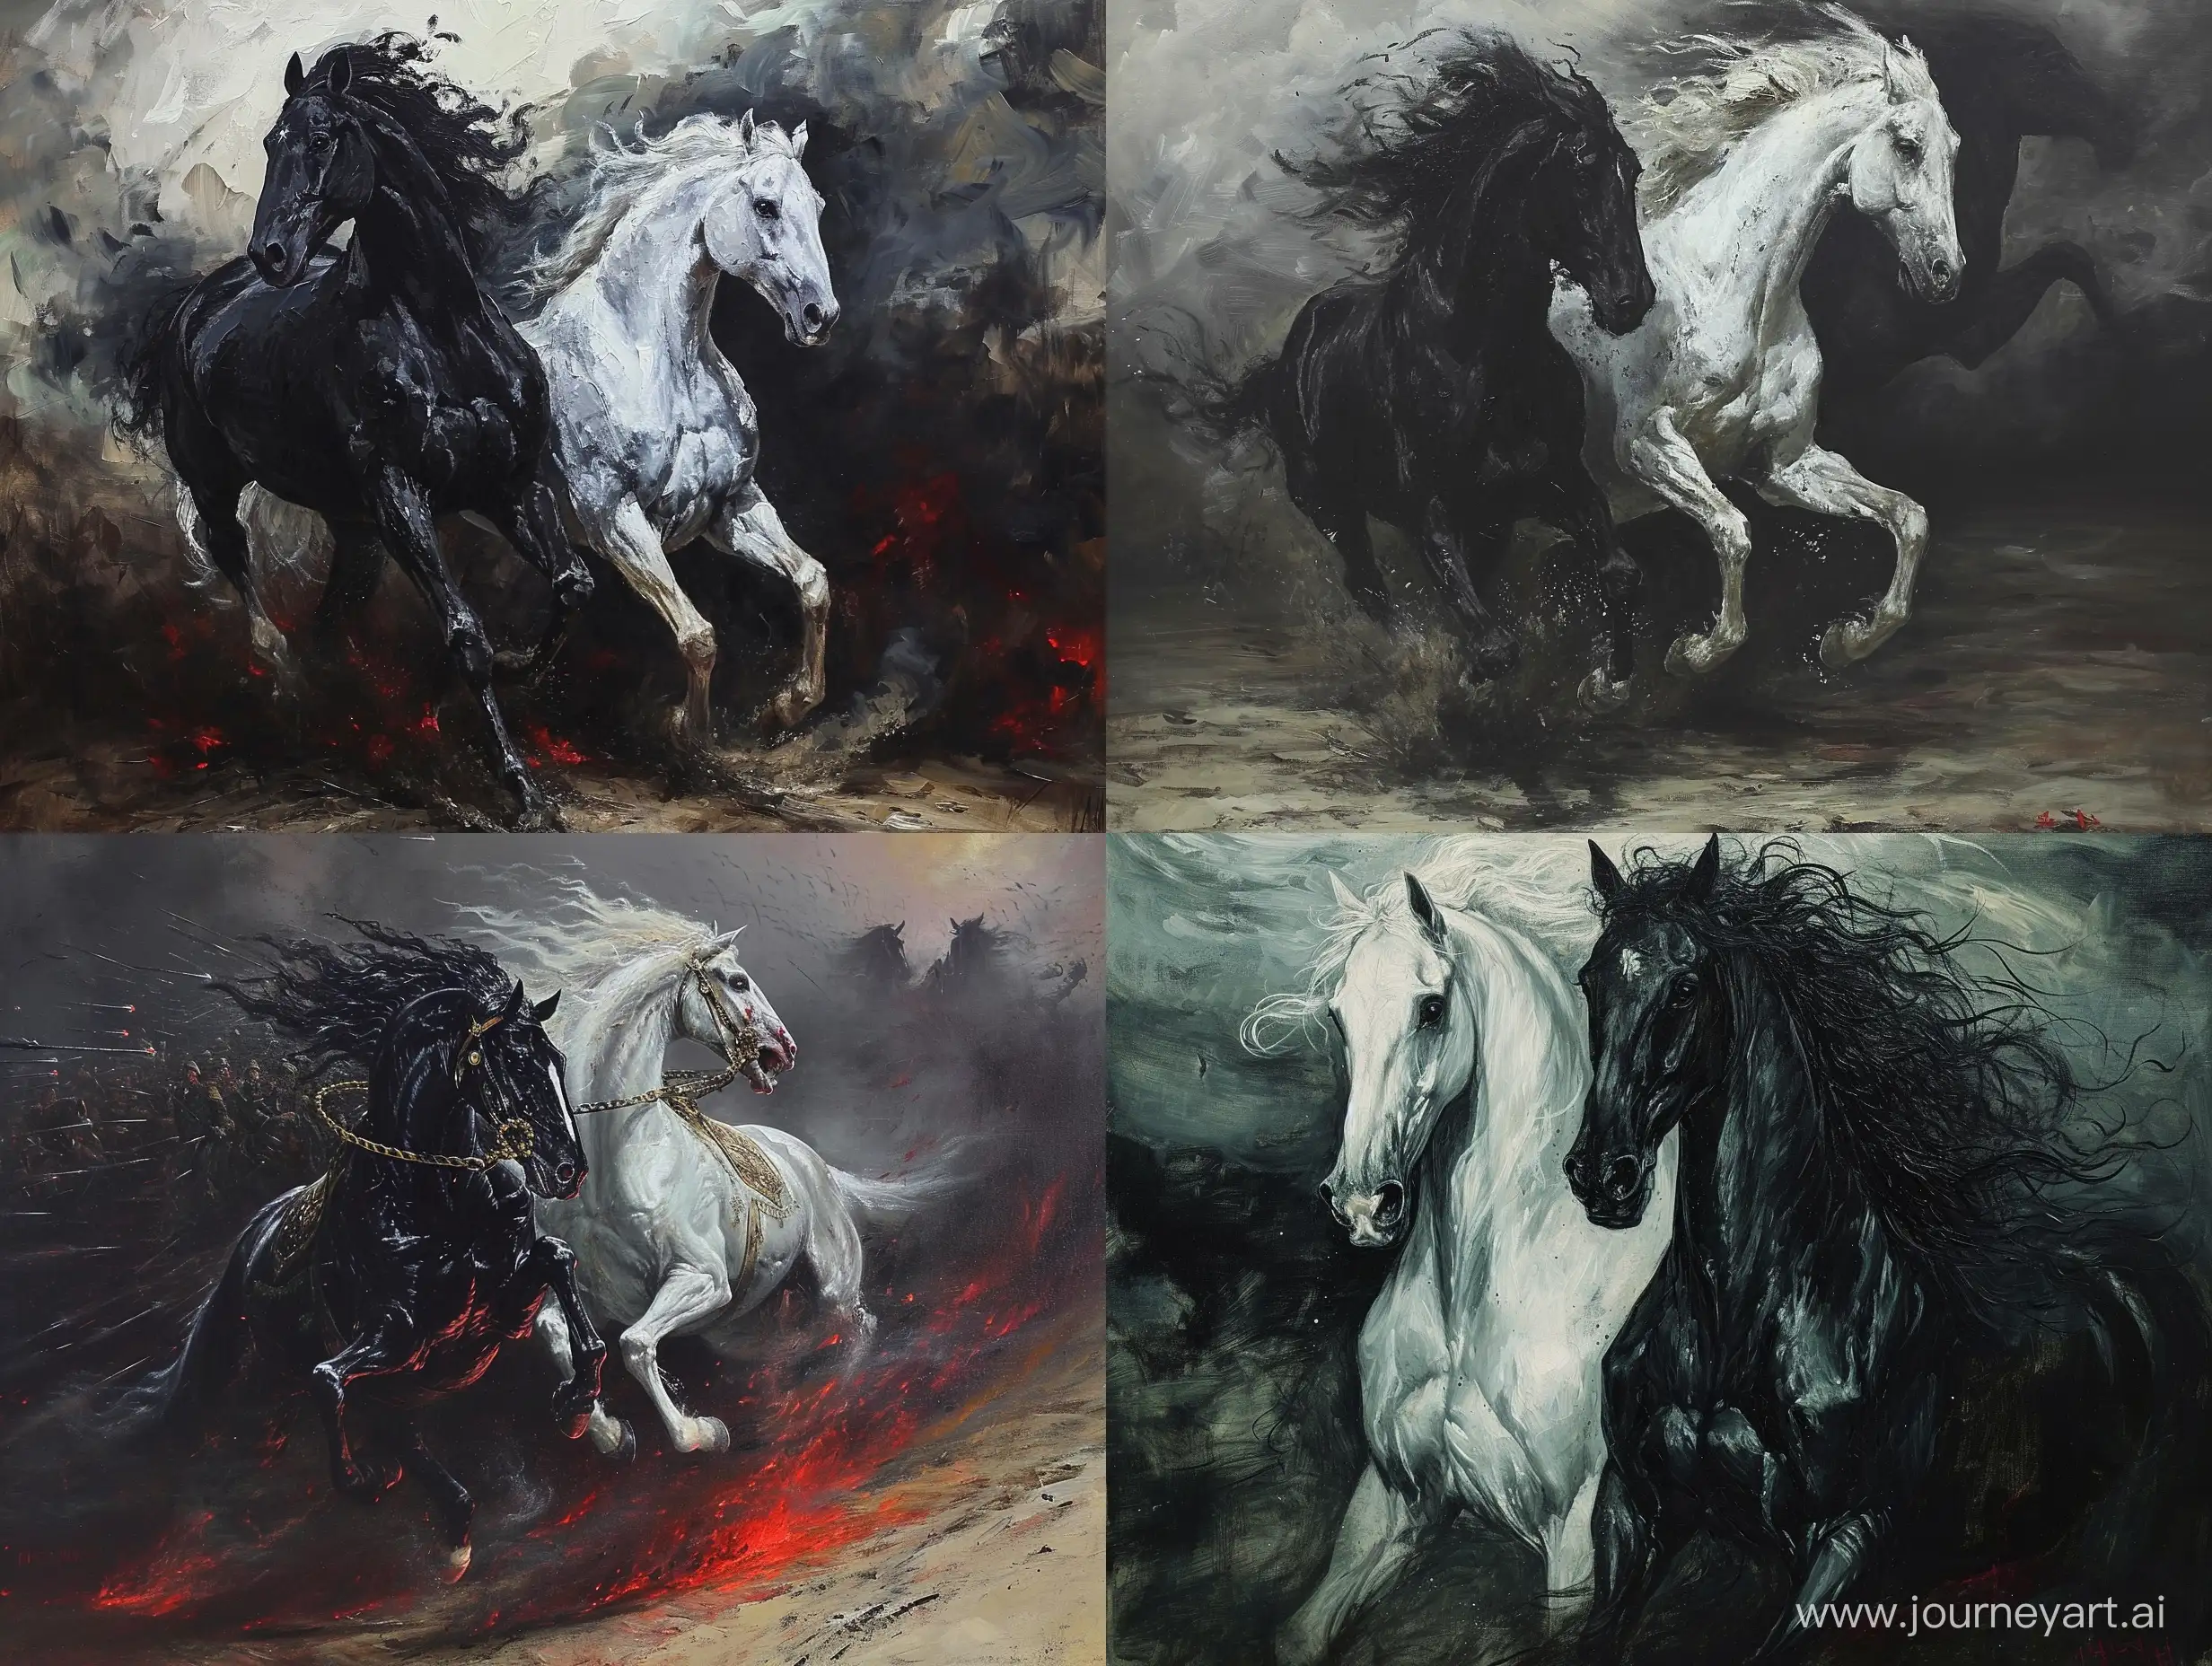 Epic-Battle-of-Black-and-White-Horses-in-Haunting-Oil-Painting